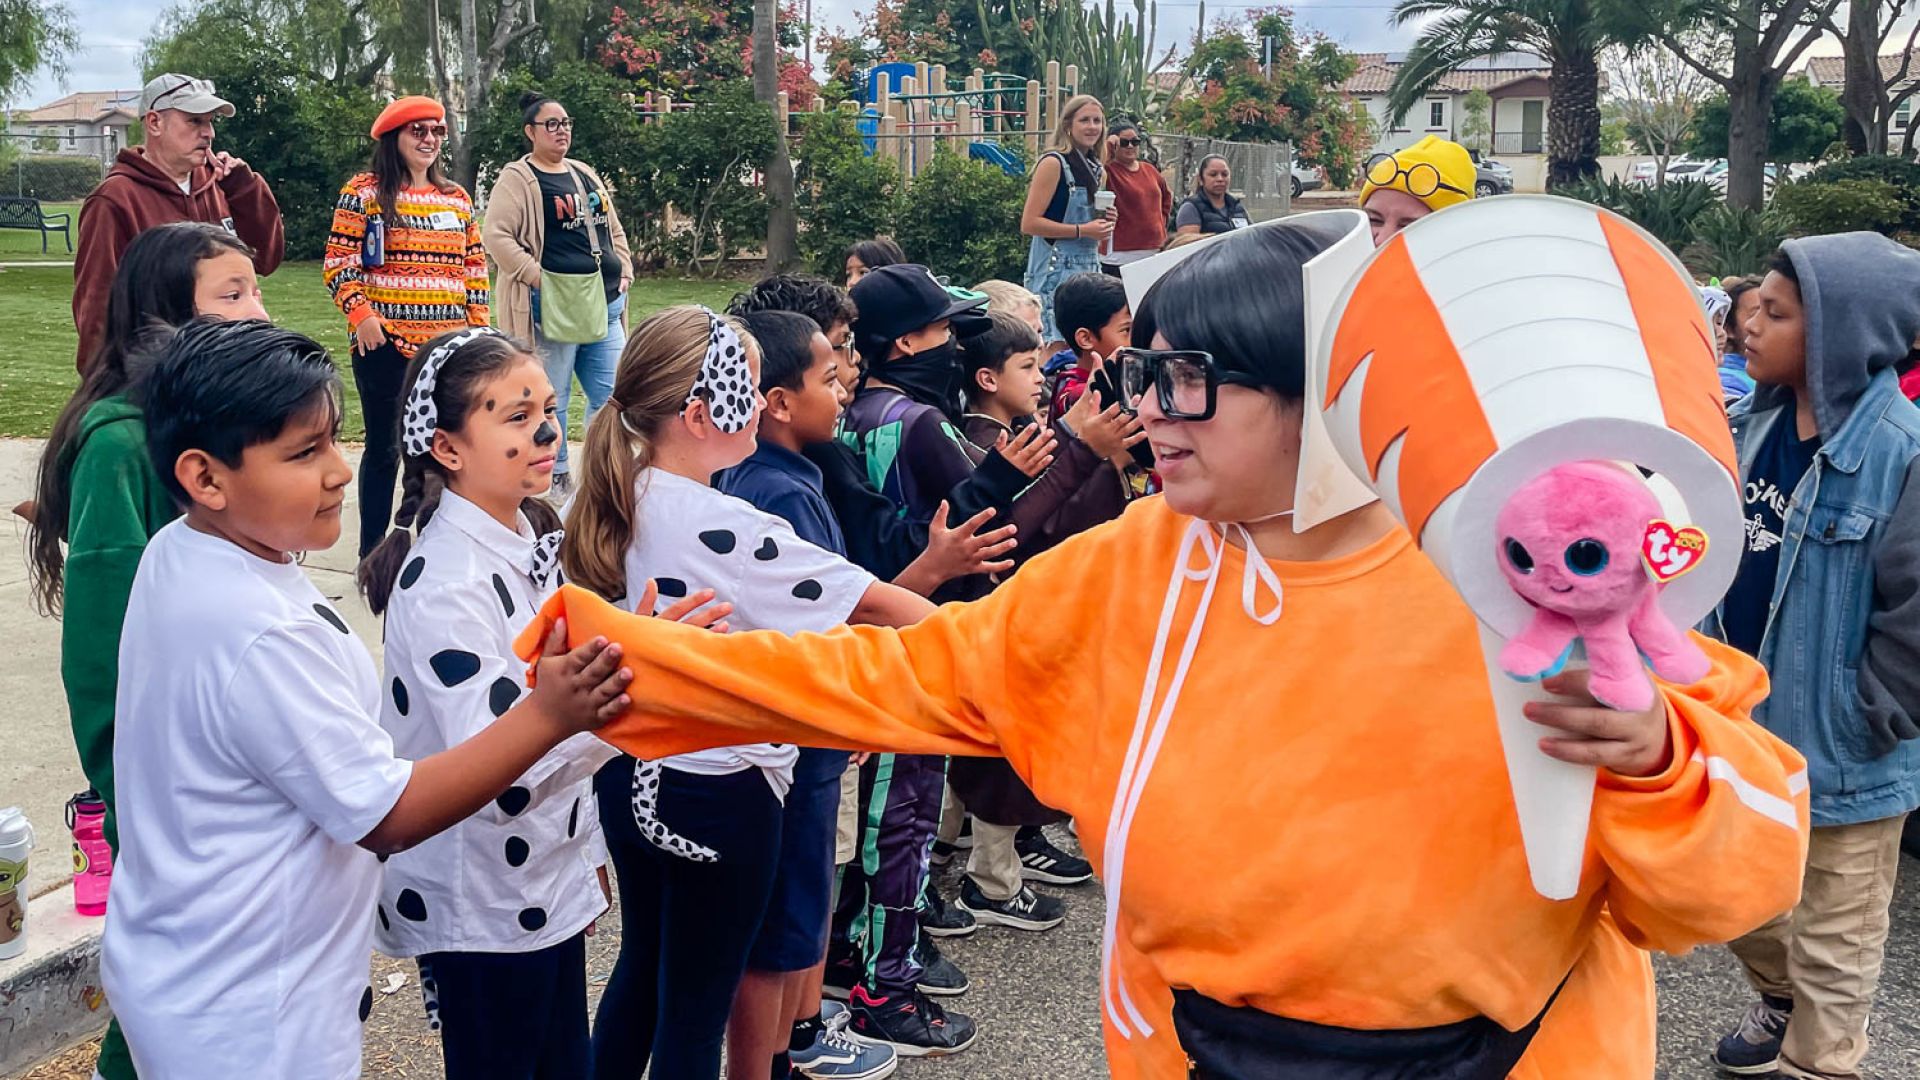 Scholarship Prep Community Celebrates Fall with Annual Literature Day and Trunk or Treat Event